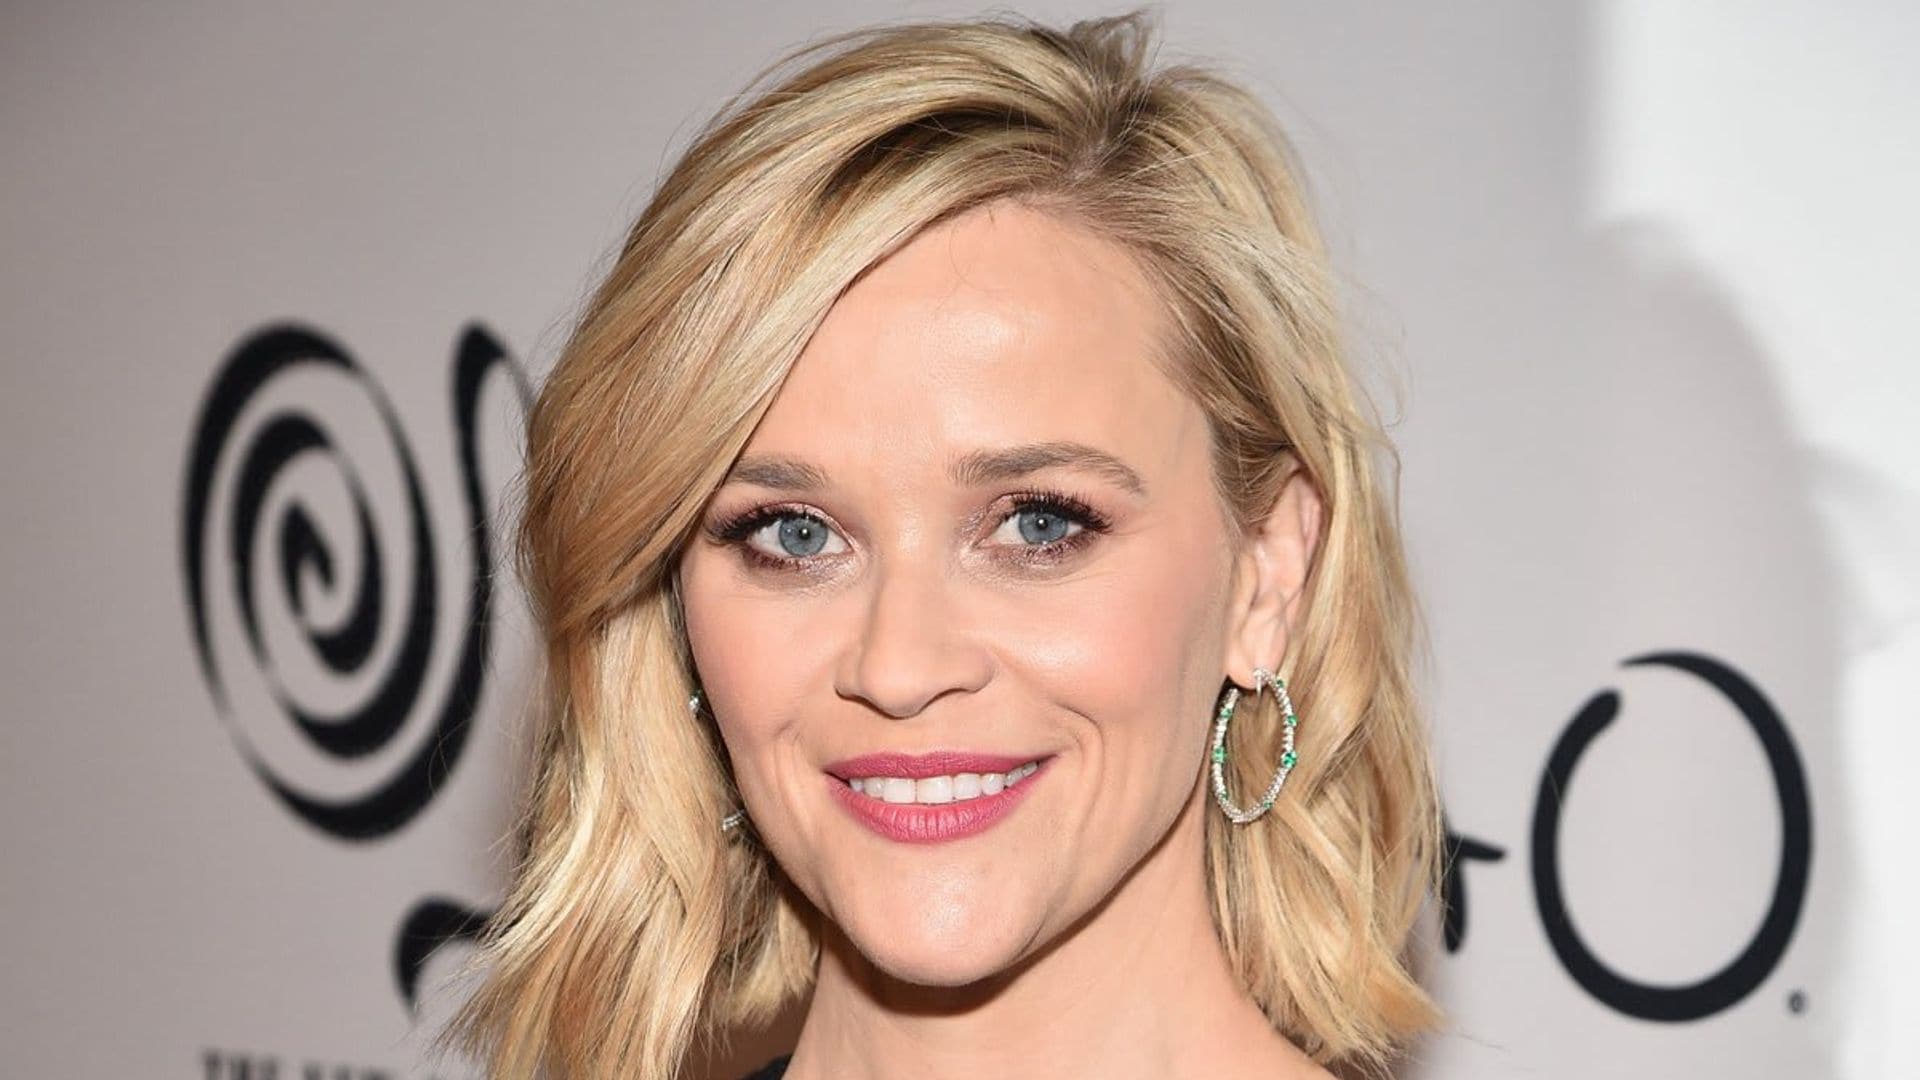 Reese Witherspoon is inspiring her followers to partake in a running challenge with her